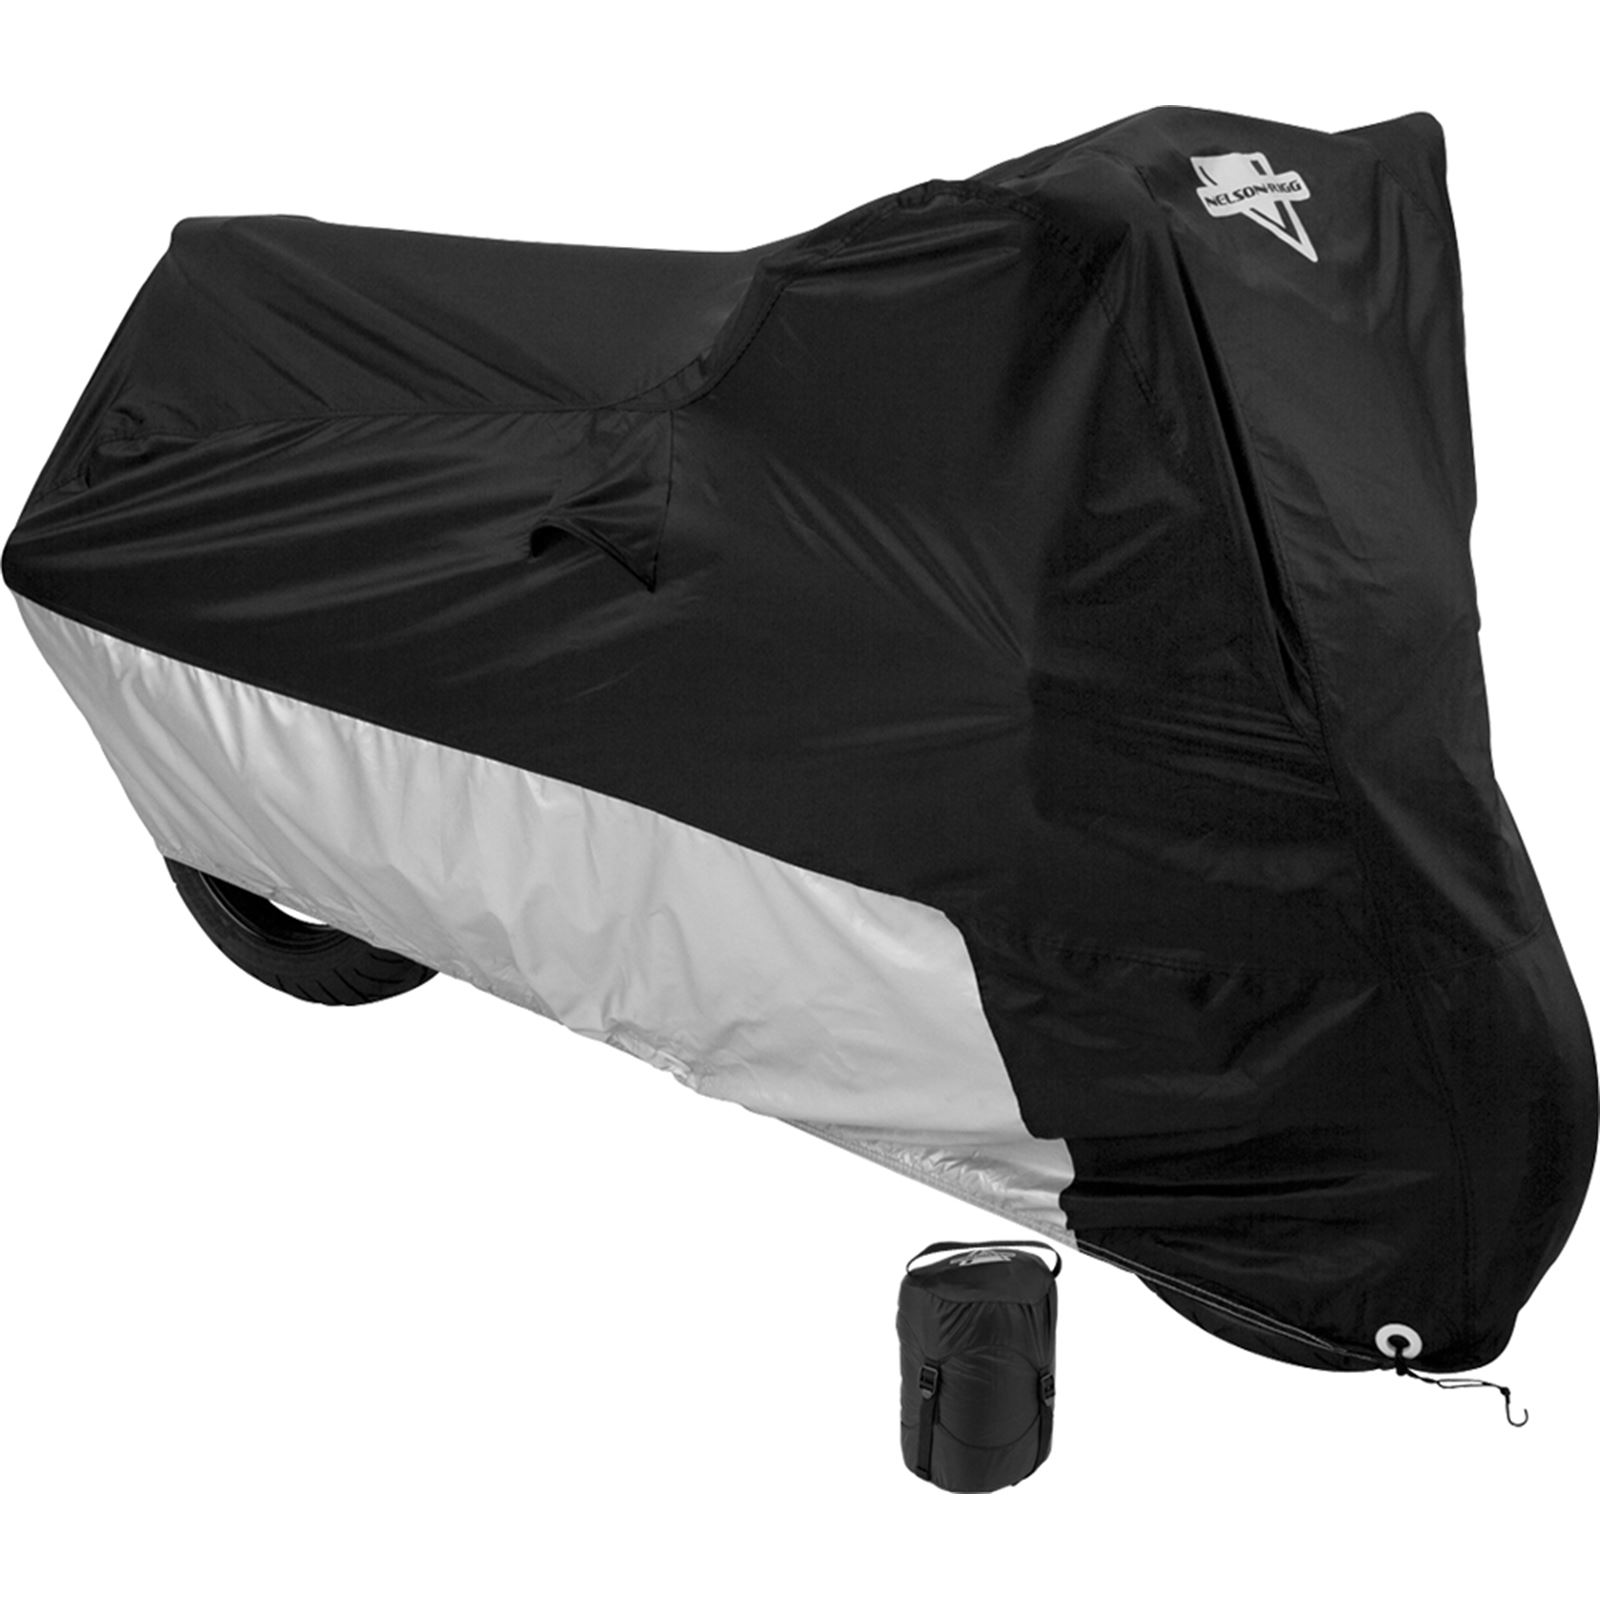 Nelson-Rigg Deluxe All Season Cycle Cover